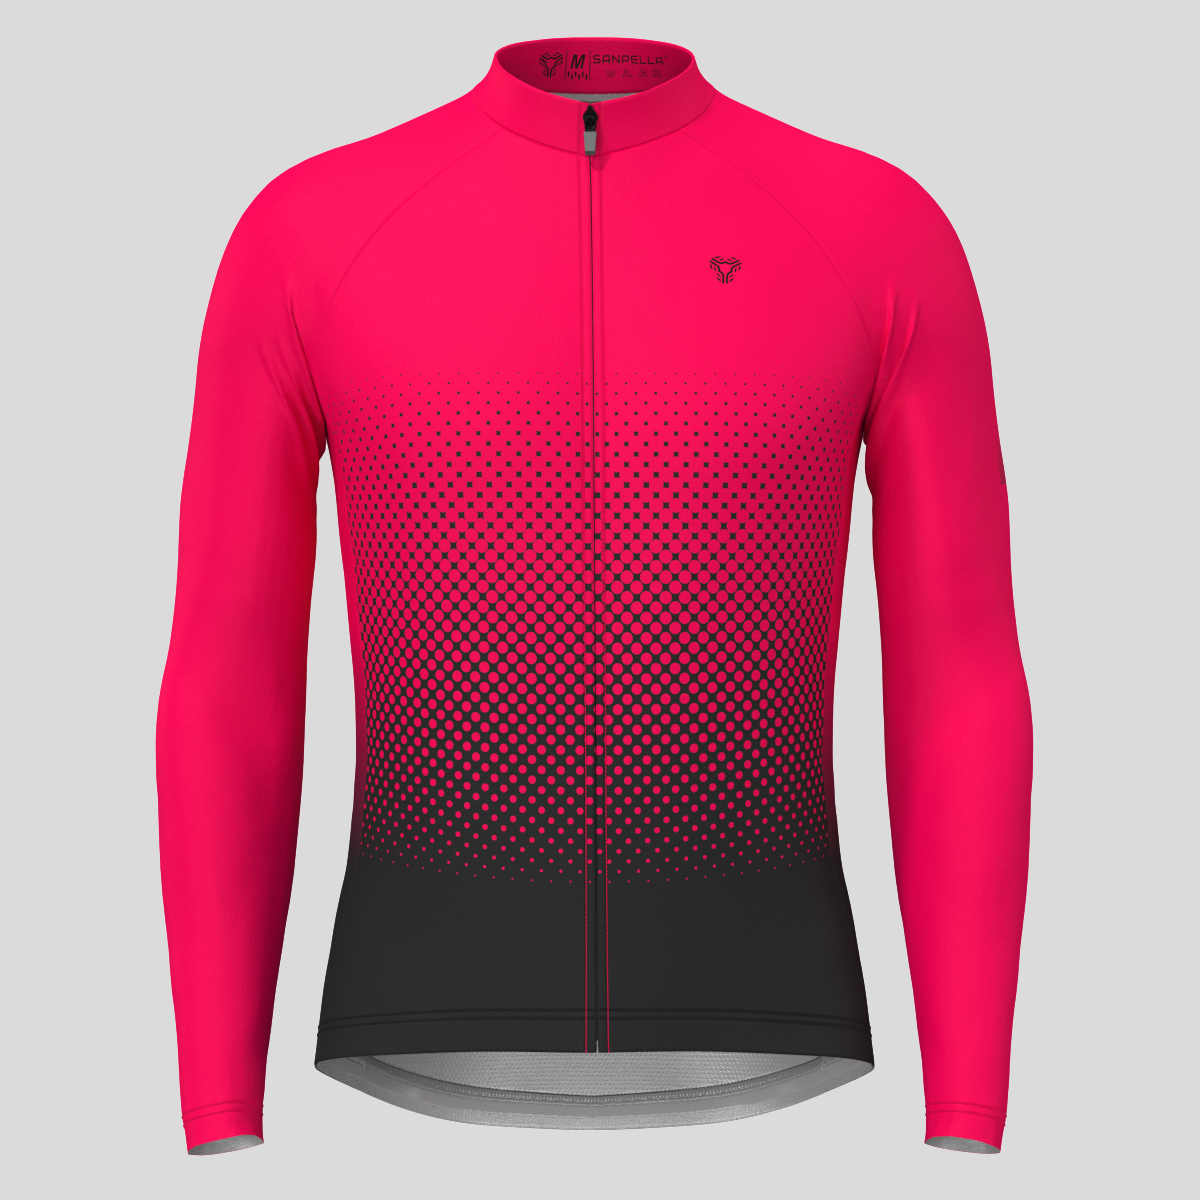 Polka Dot Gradient Men's LS Cycling Jersey - Jester Red